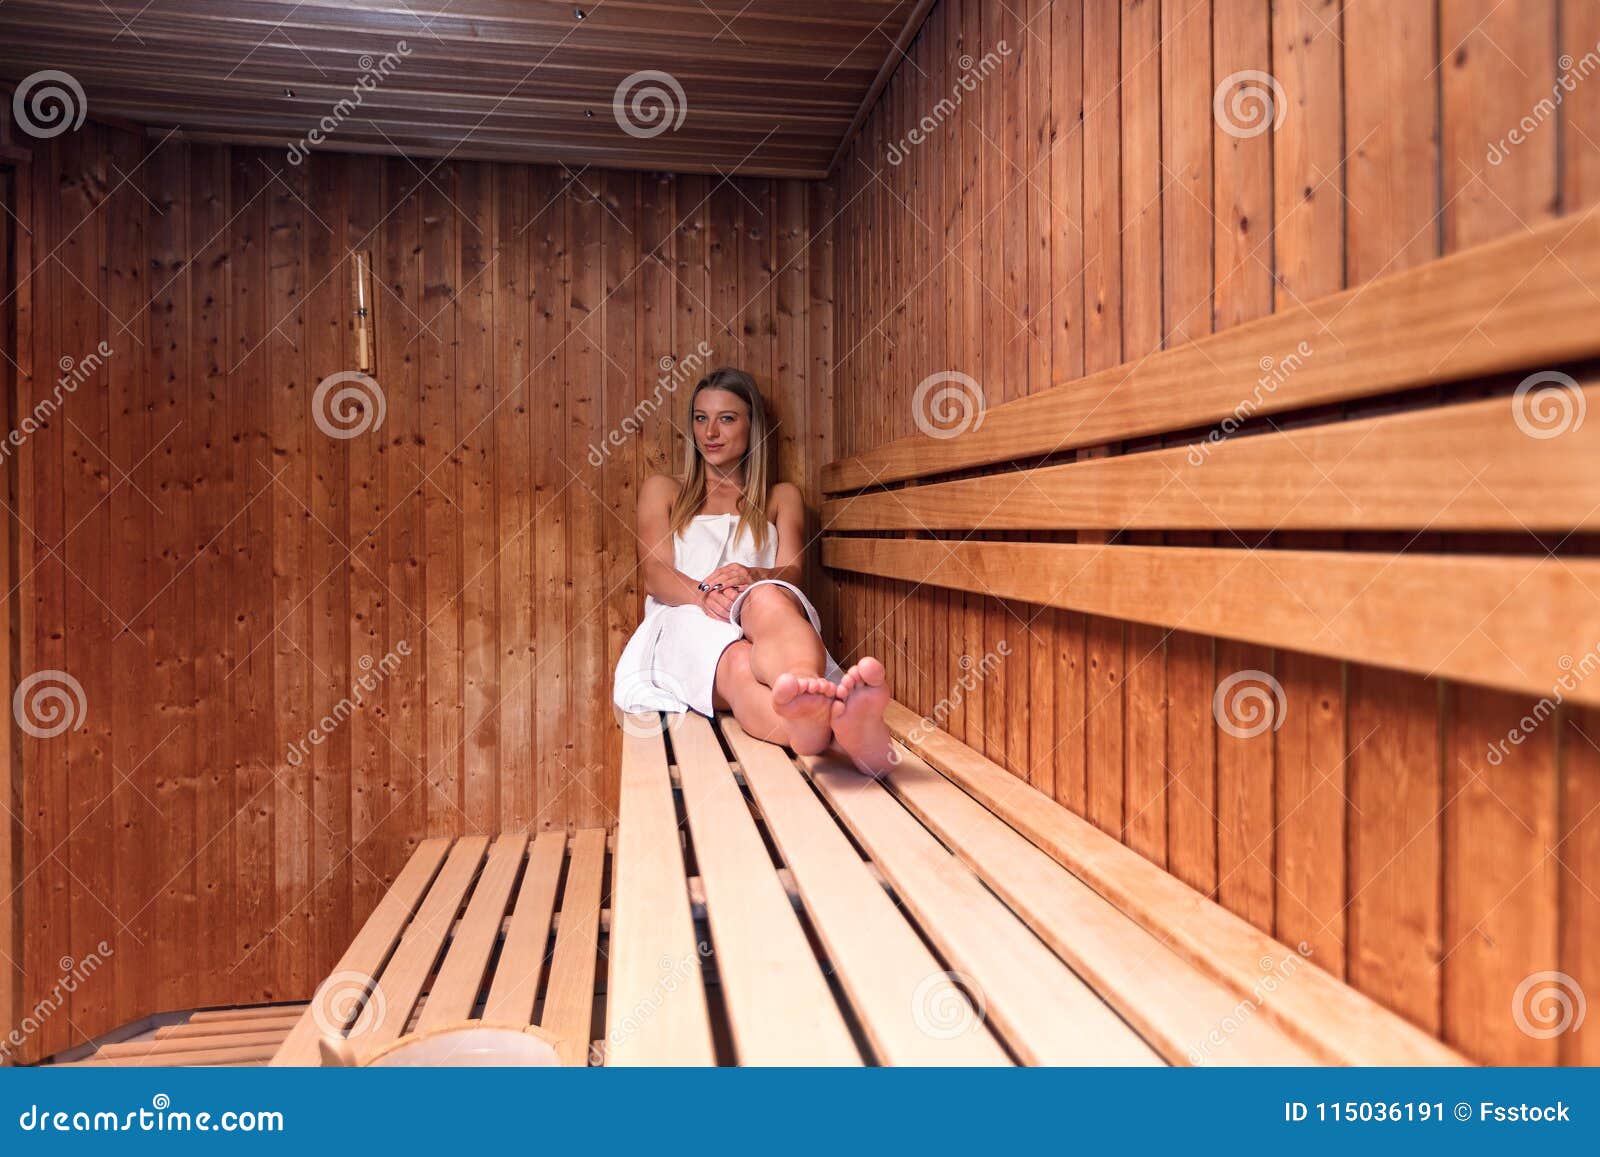 African American Woman Relaxing In Sauna With Her Eyes 